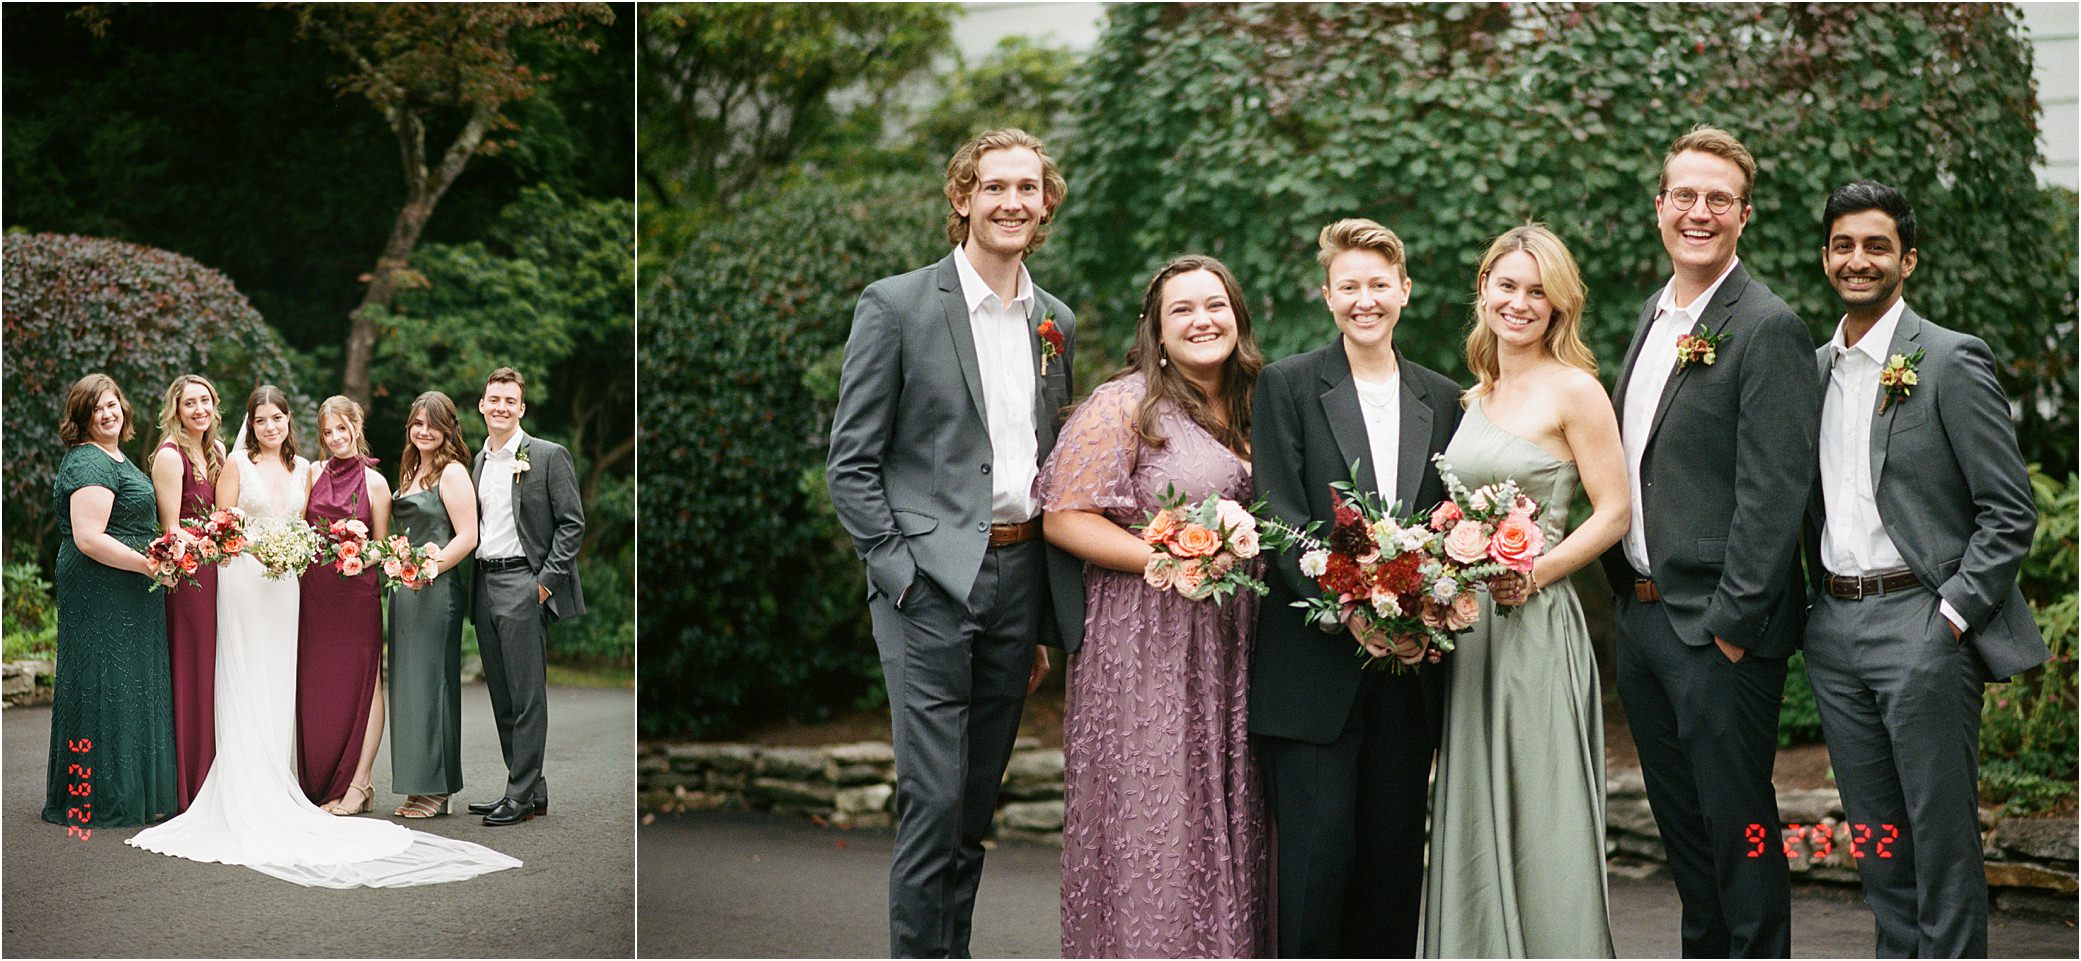 Nora and Lex pose with their wedding parties for film wedding photos.